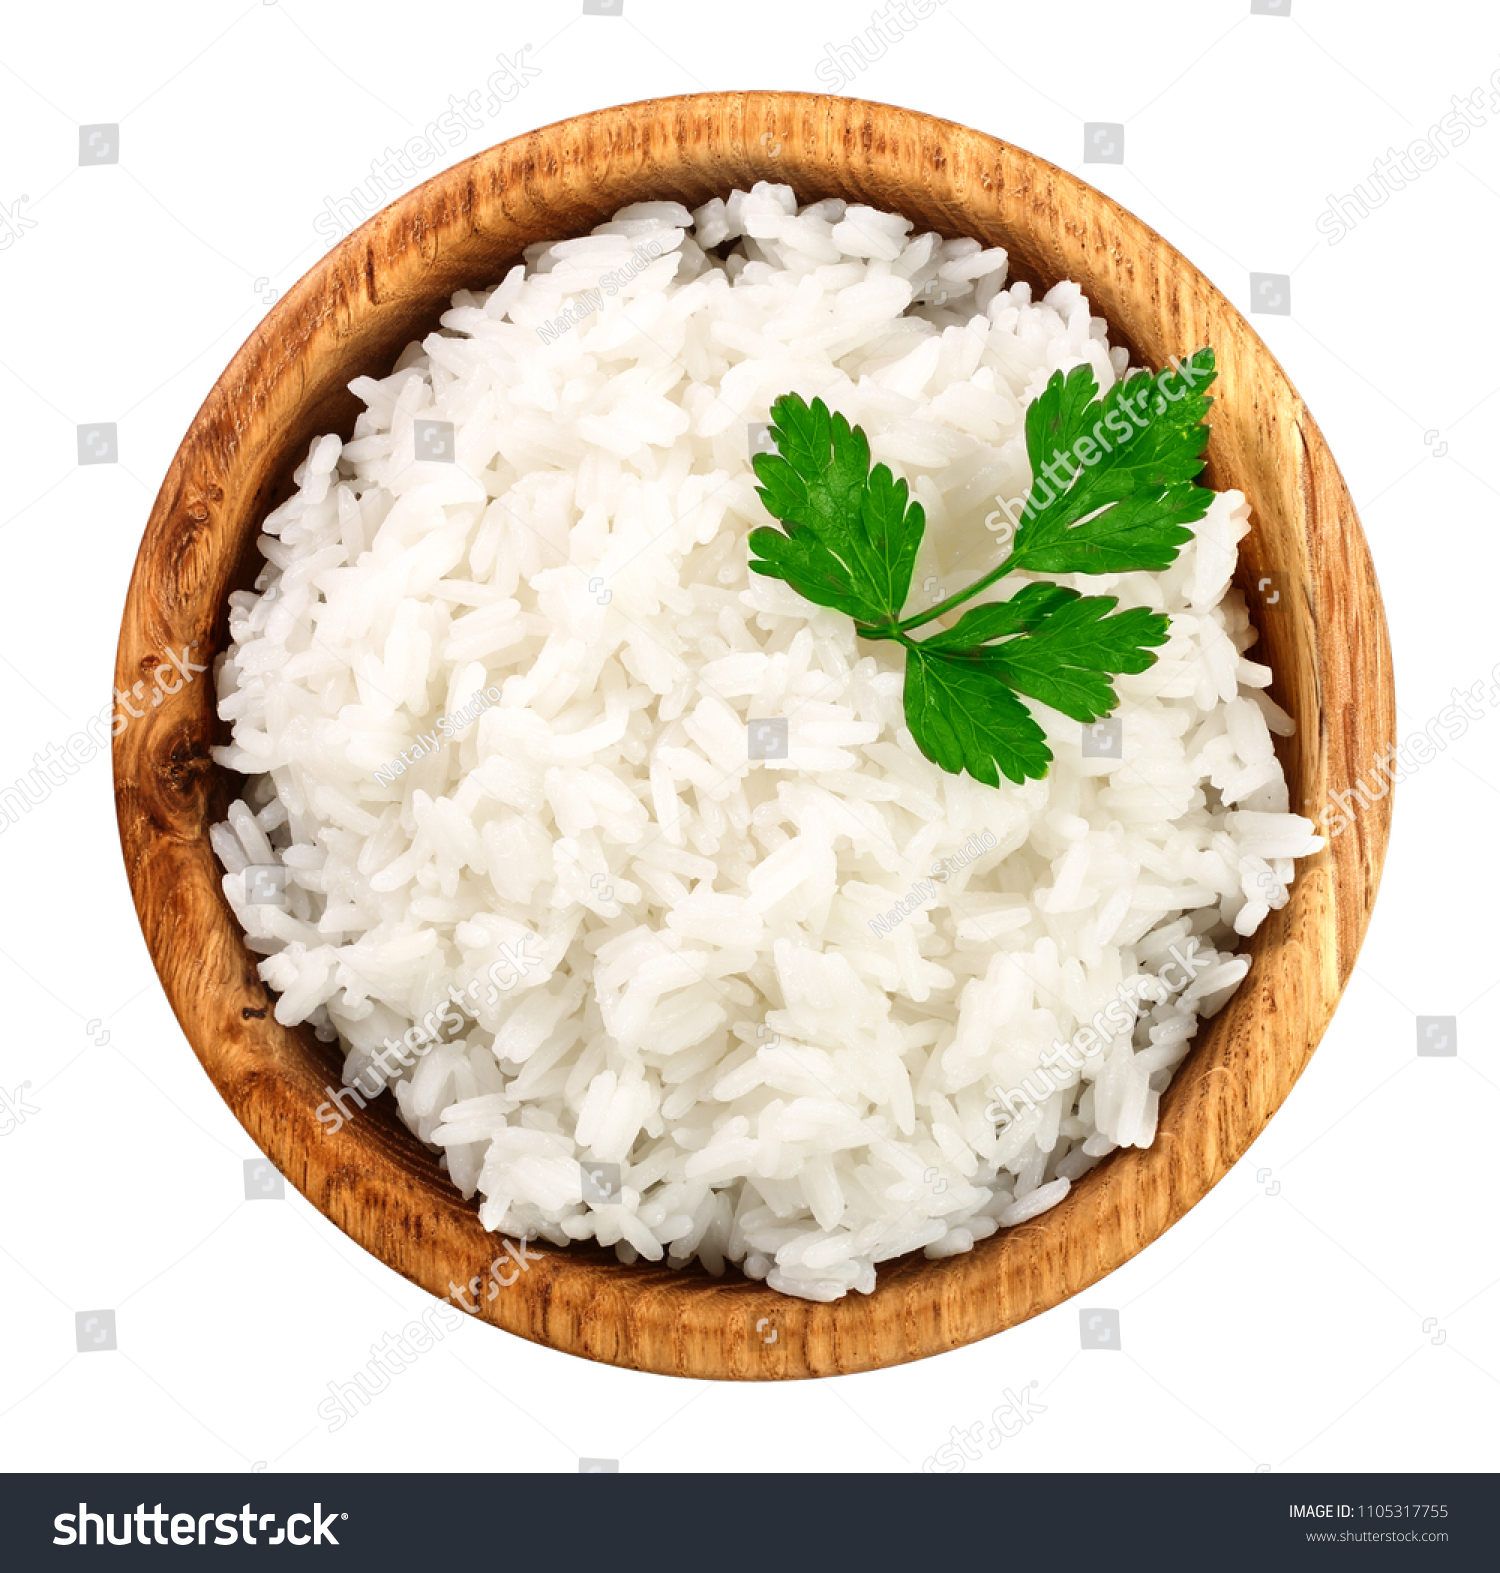 rice in a wooden bowl isolated on white background. Top view. Flat lay #1105317755